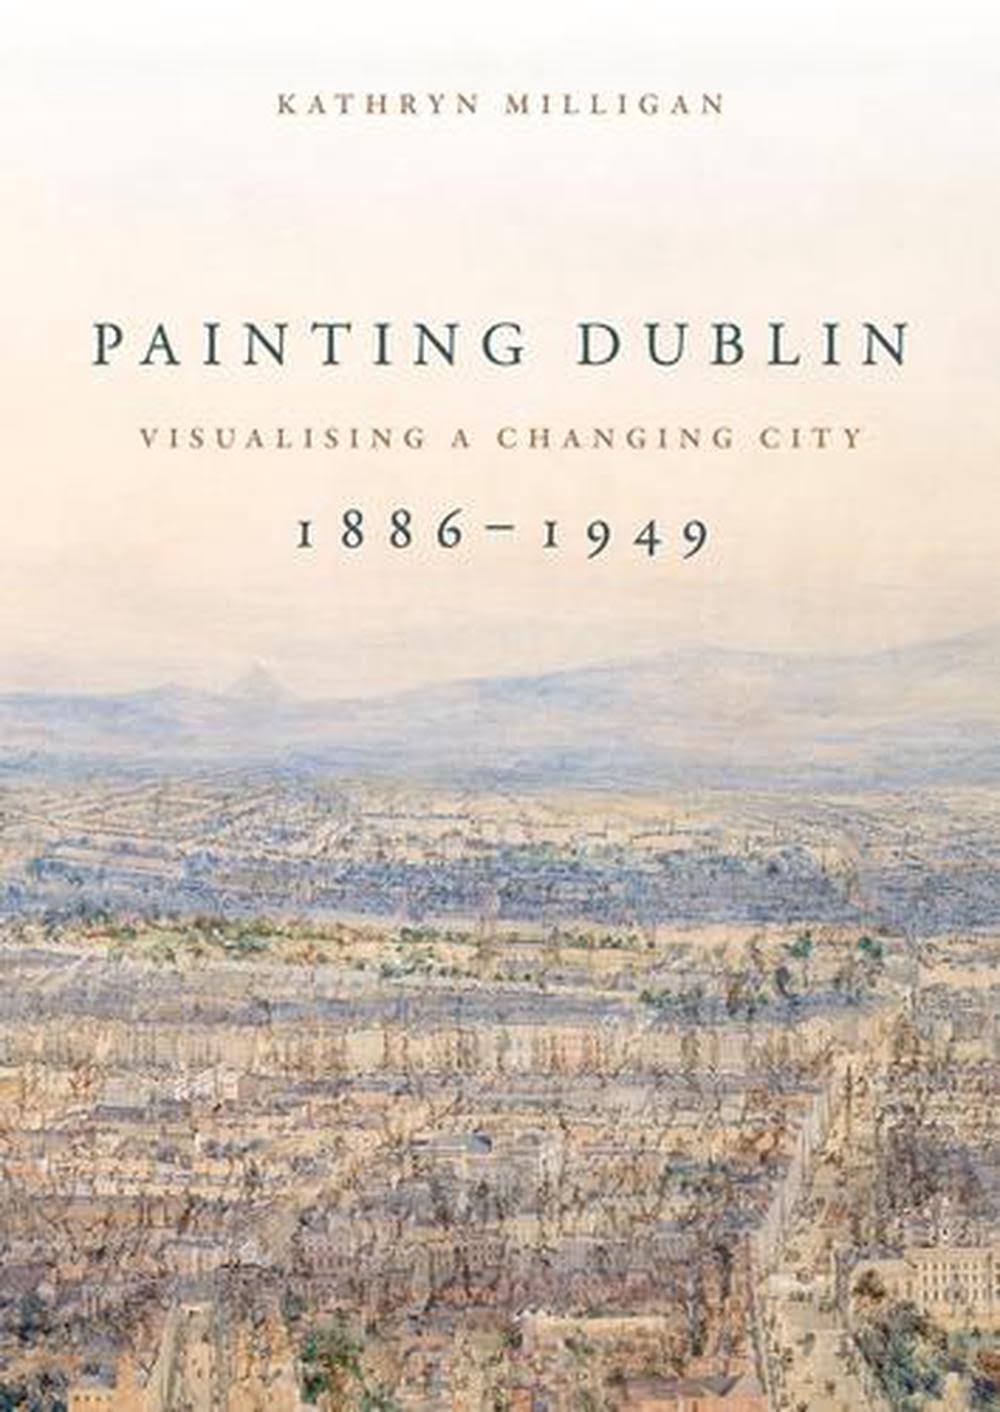 Painting Dublin, 1886-1949: Visualising a Changing City [Book]